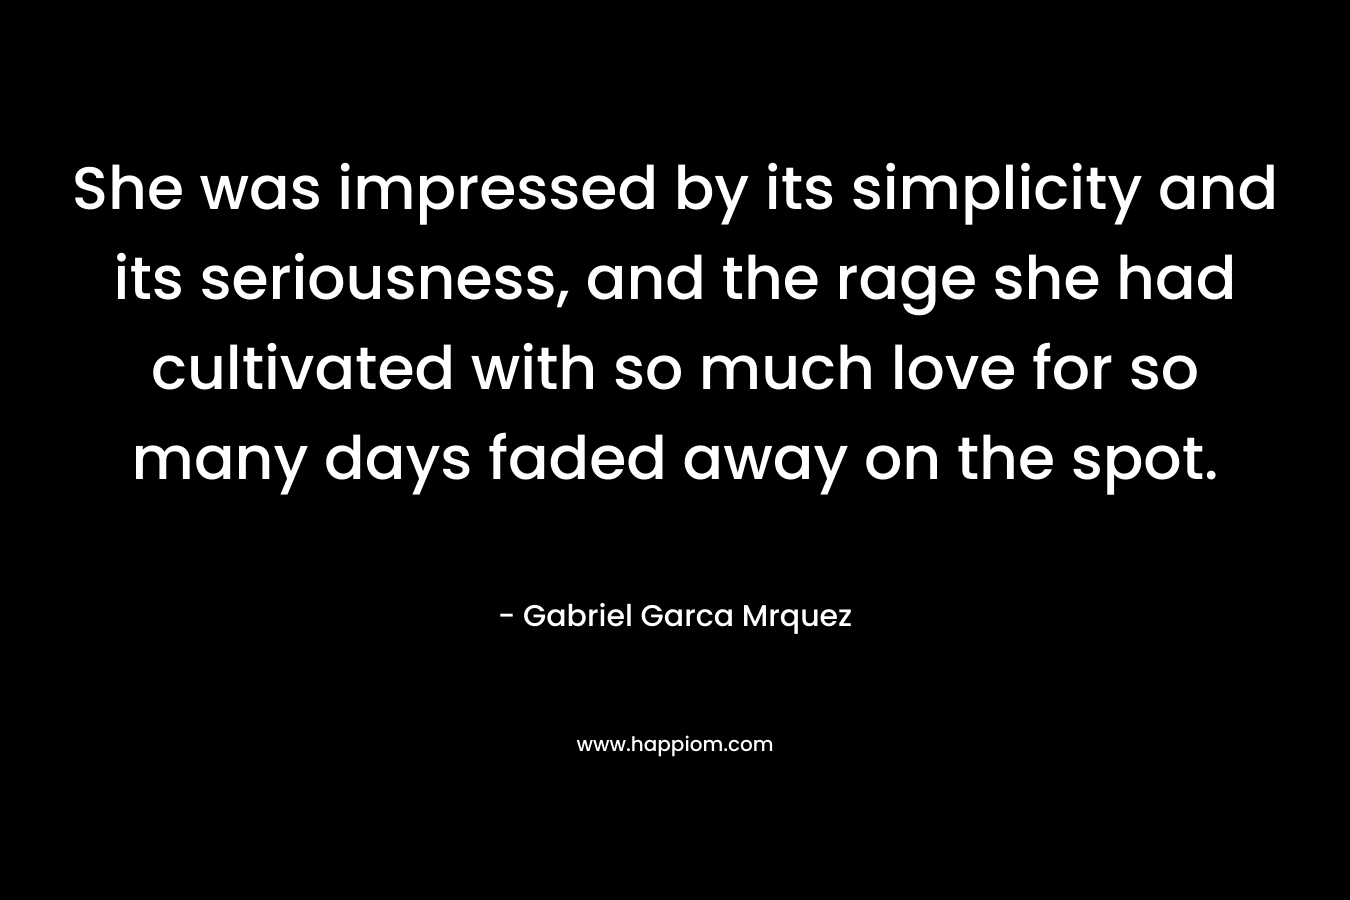 She was impressed by its simplicity and its seriousness, and the rage she had cultivated with so much love for so many days faded away on the spot. – Gabriel Garca Mrquez